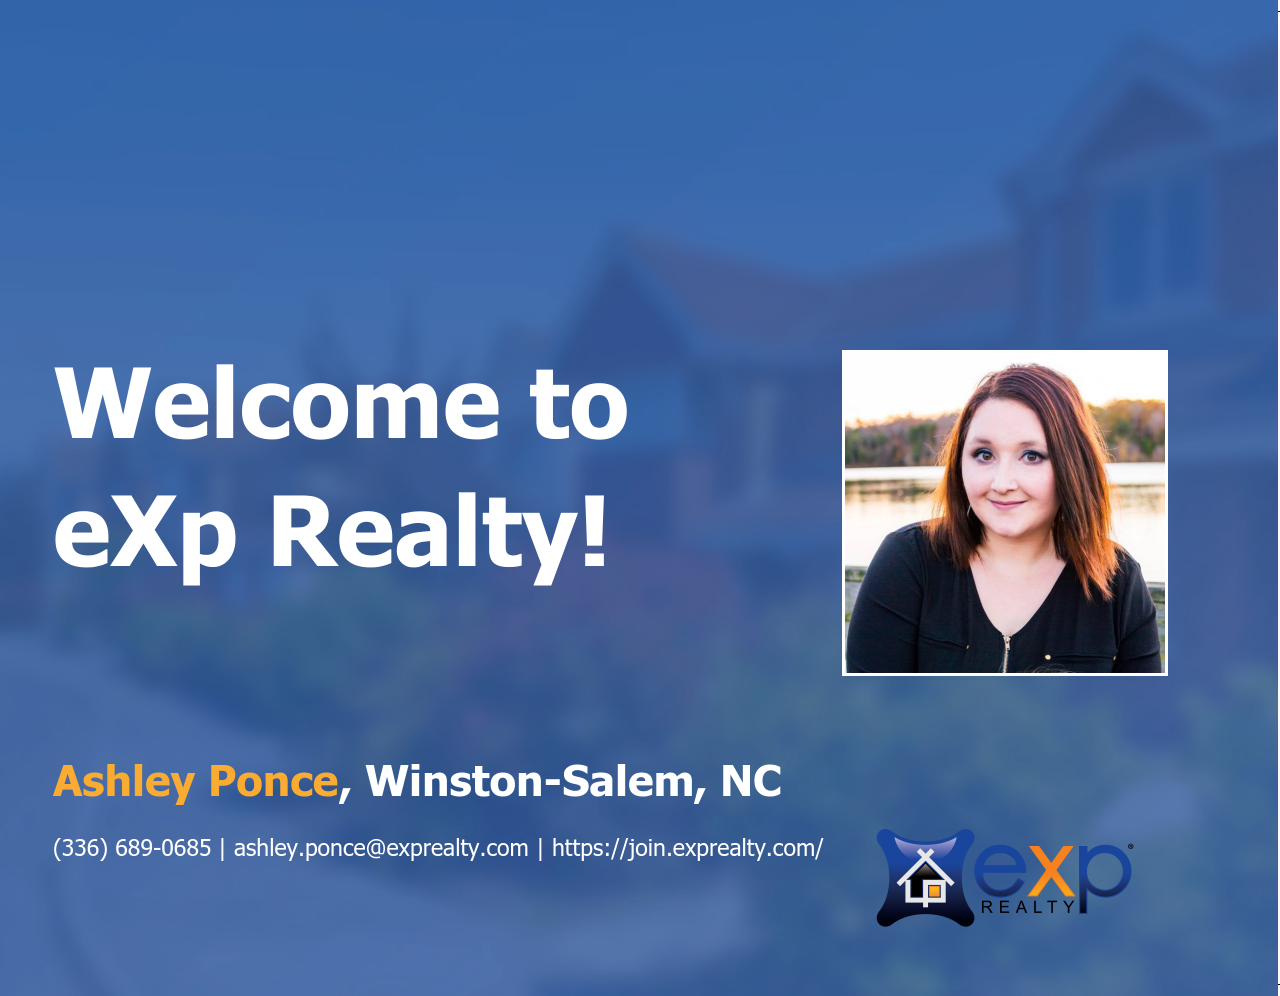 eXp Realty Welcomes Ashley Ponce!